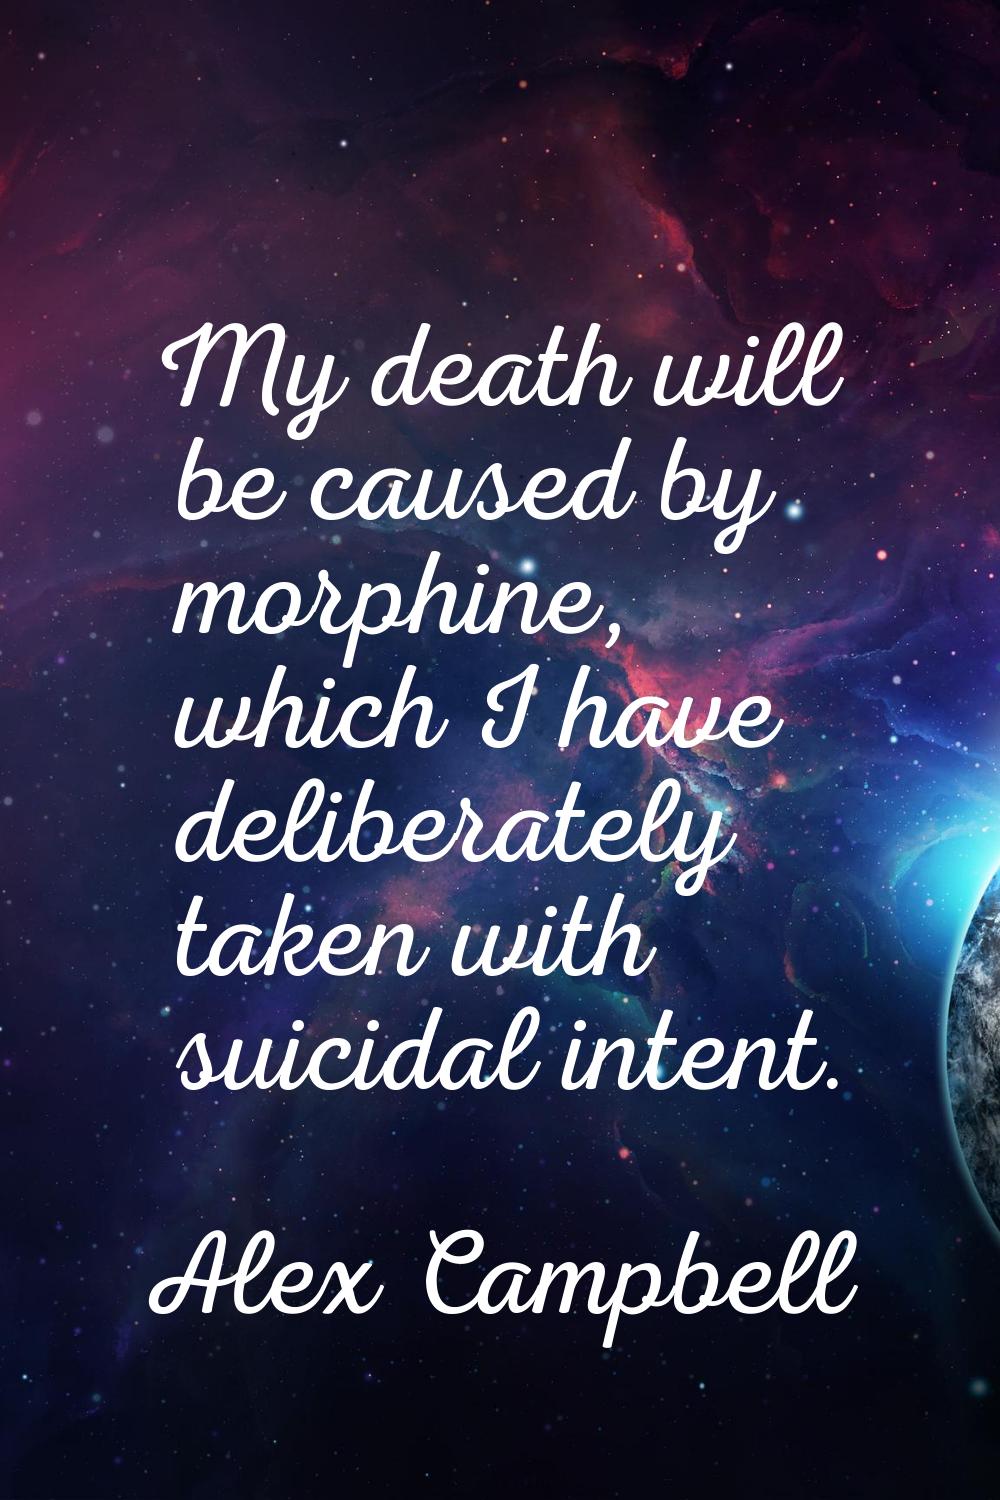 My death will be caused by morphine, which I have deliberately taken with suicidal intent.